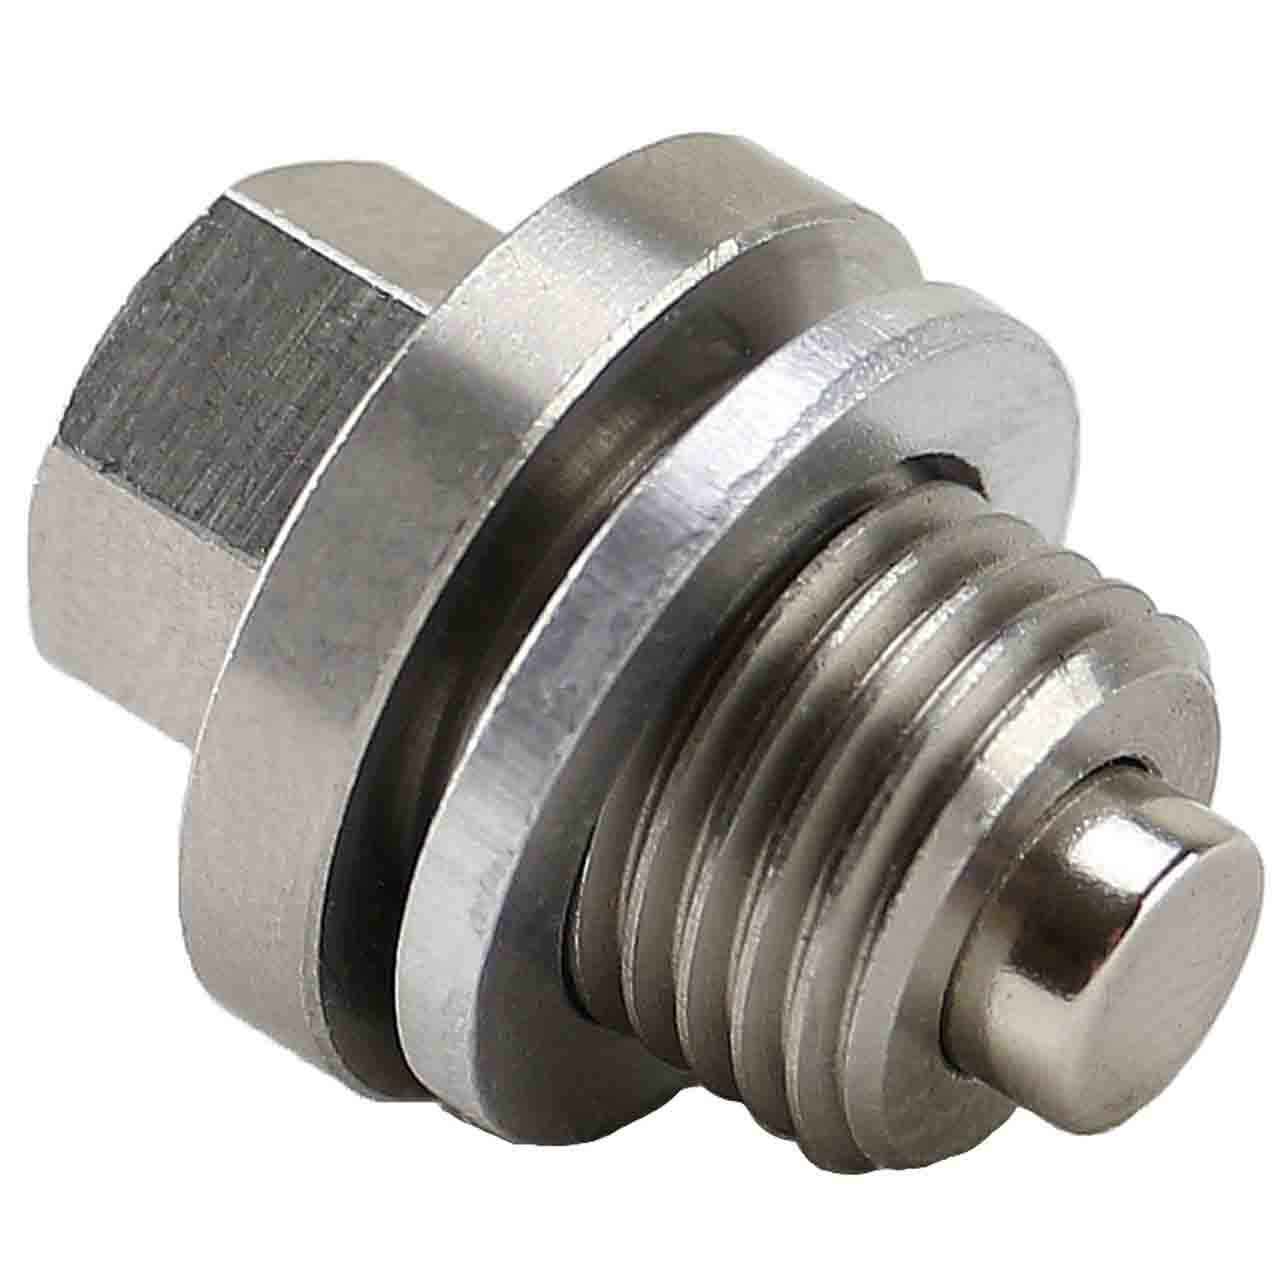 01500-1220B for Suzuki Motorcycle  - Stainless Steel Magnetic Oil Drain Plug with Neodymium Magnet - Made In USA